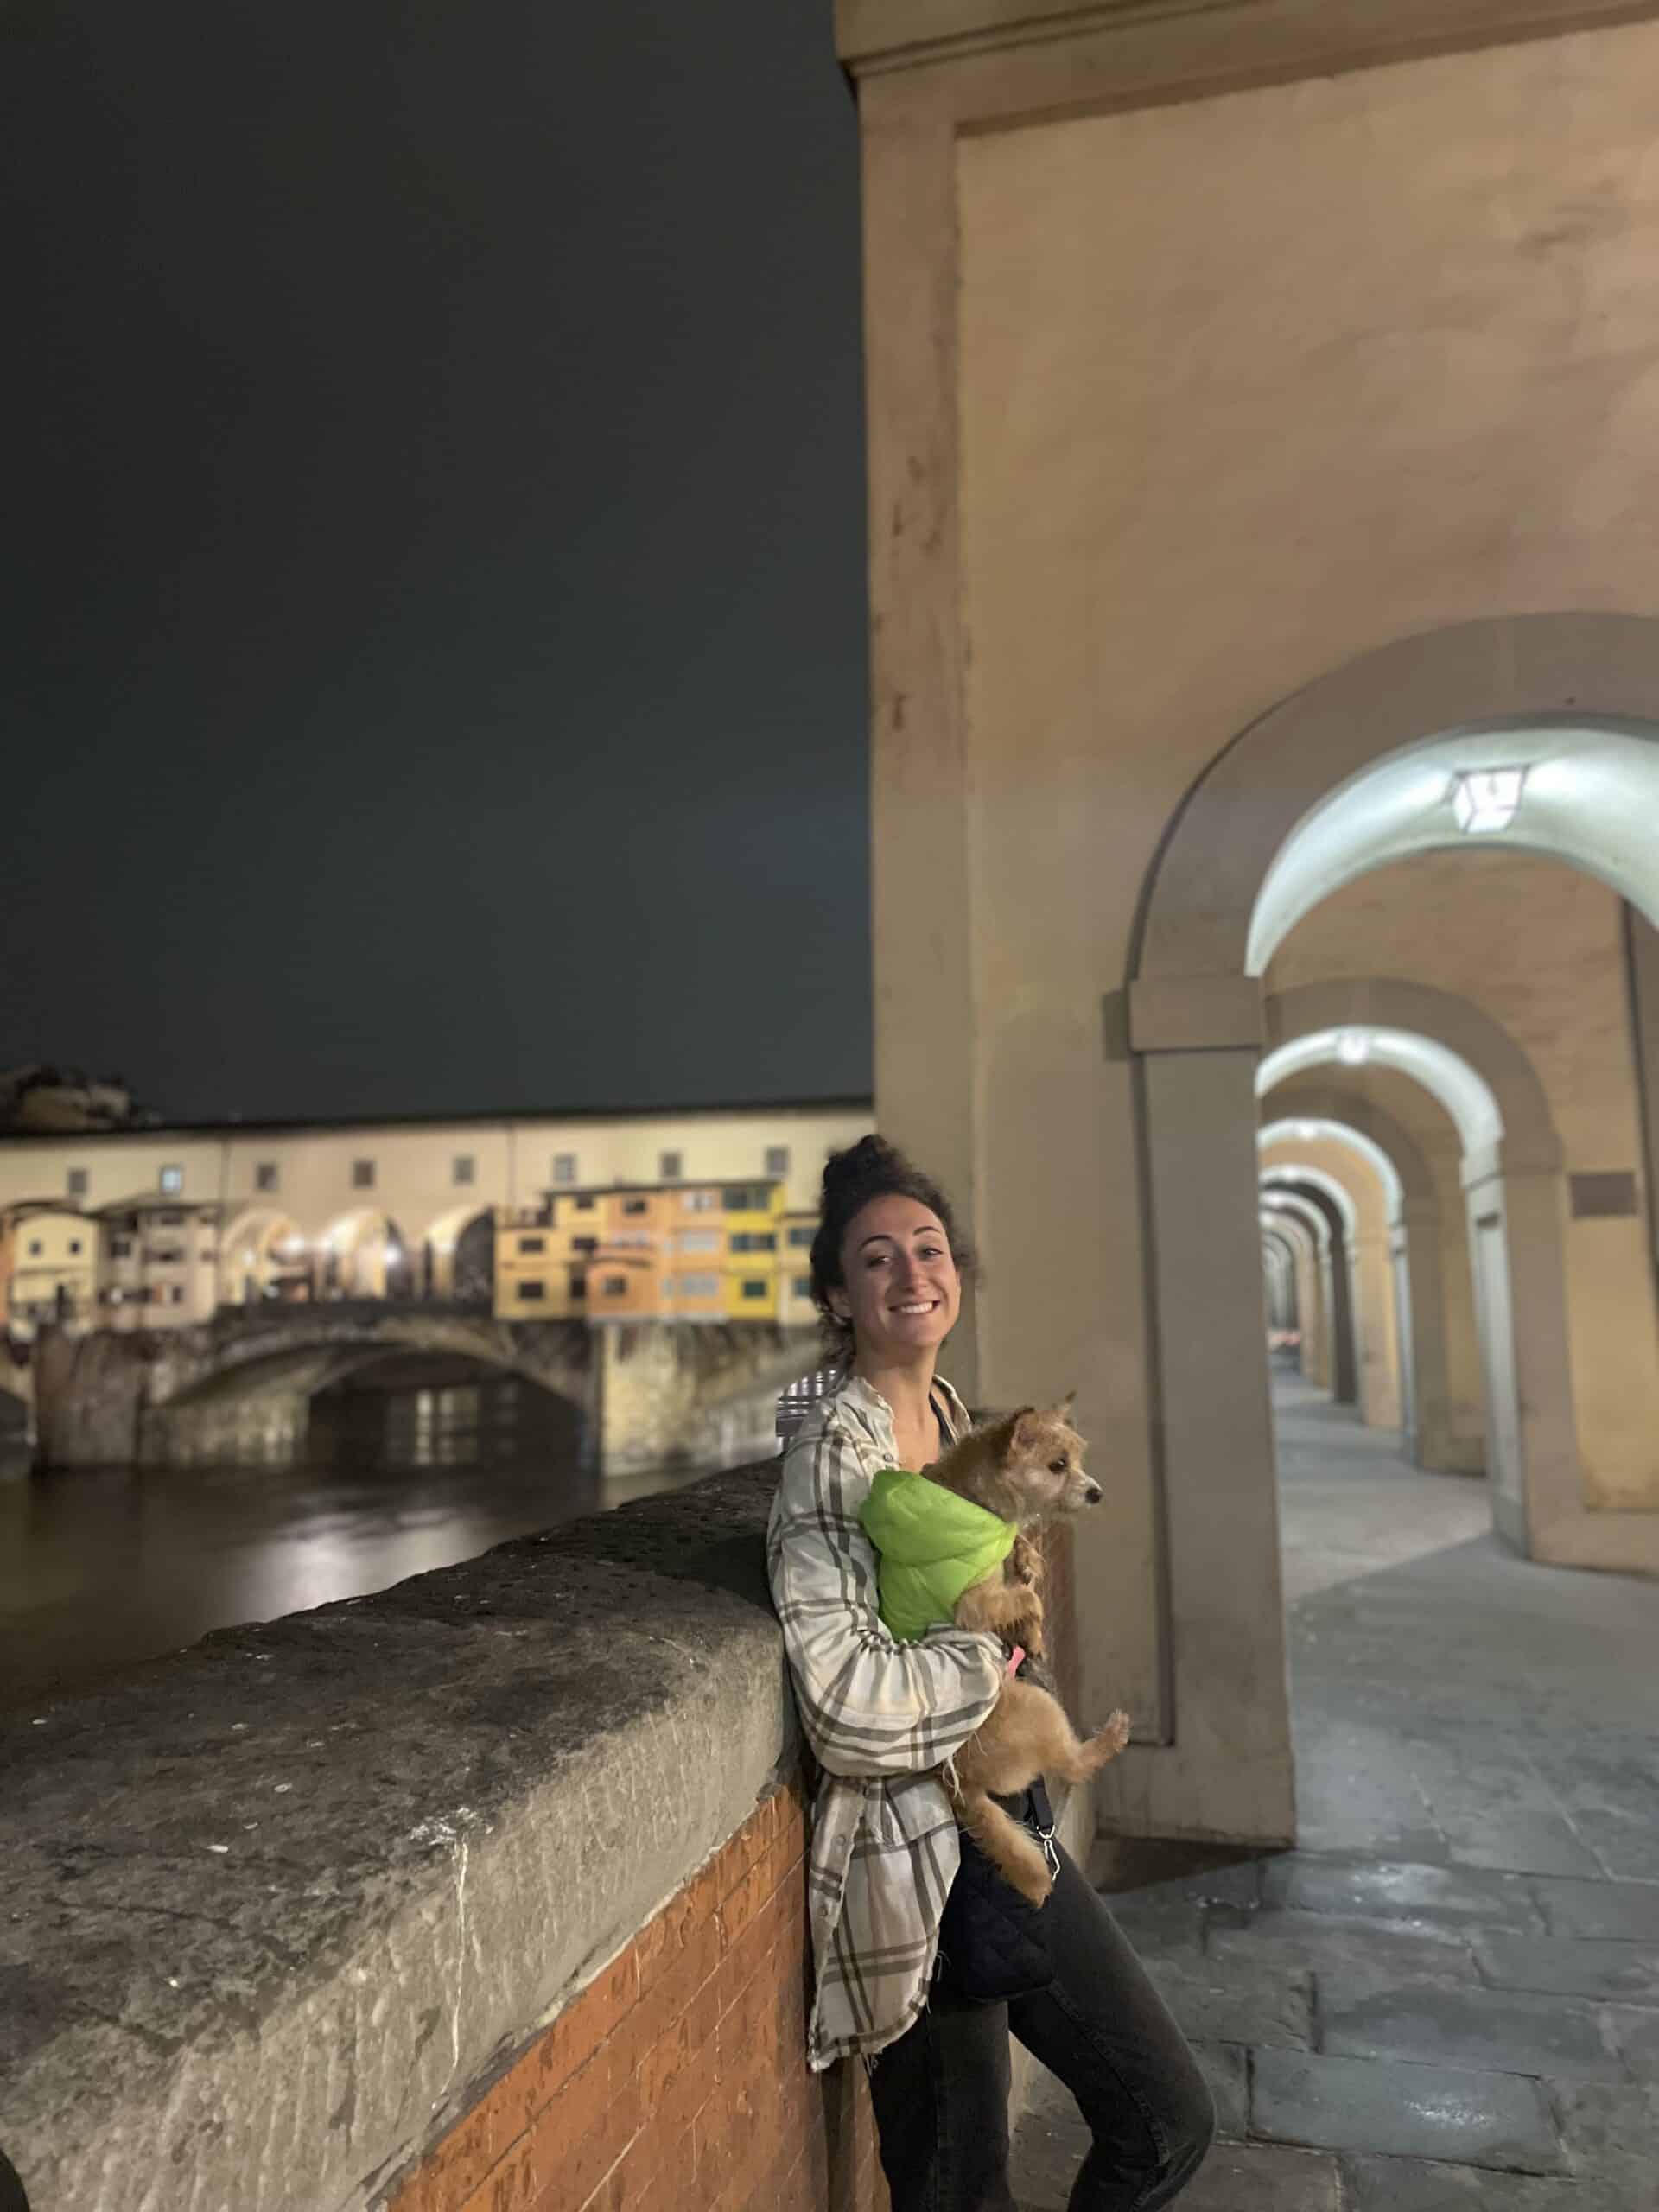 Sheila and I walking near Centro Storico in Florence on our Italian adventure